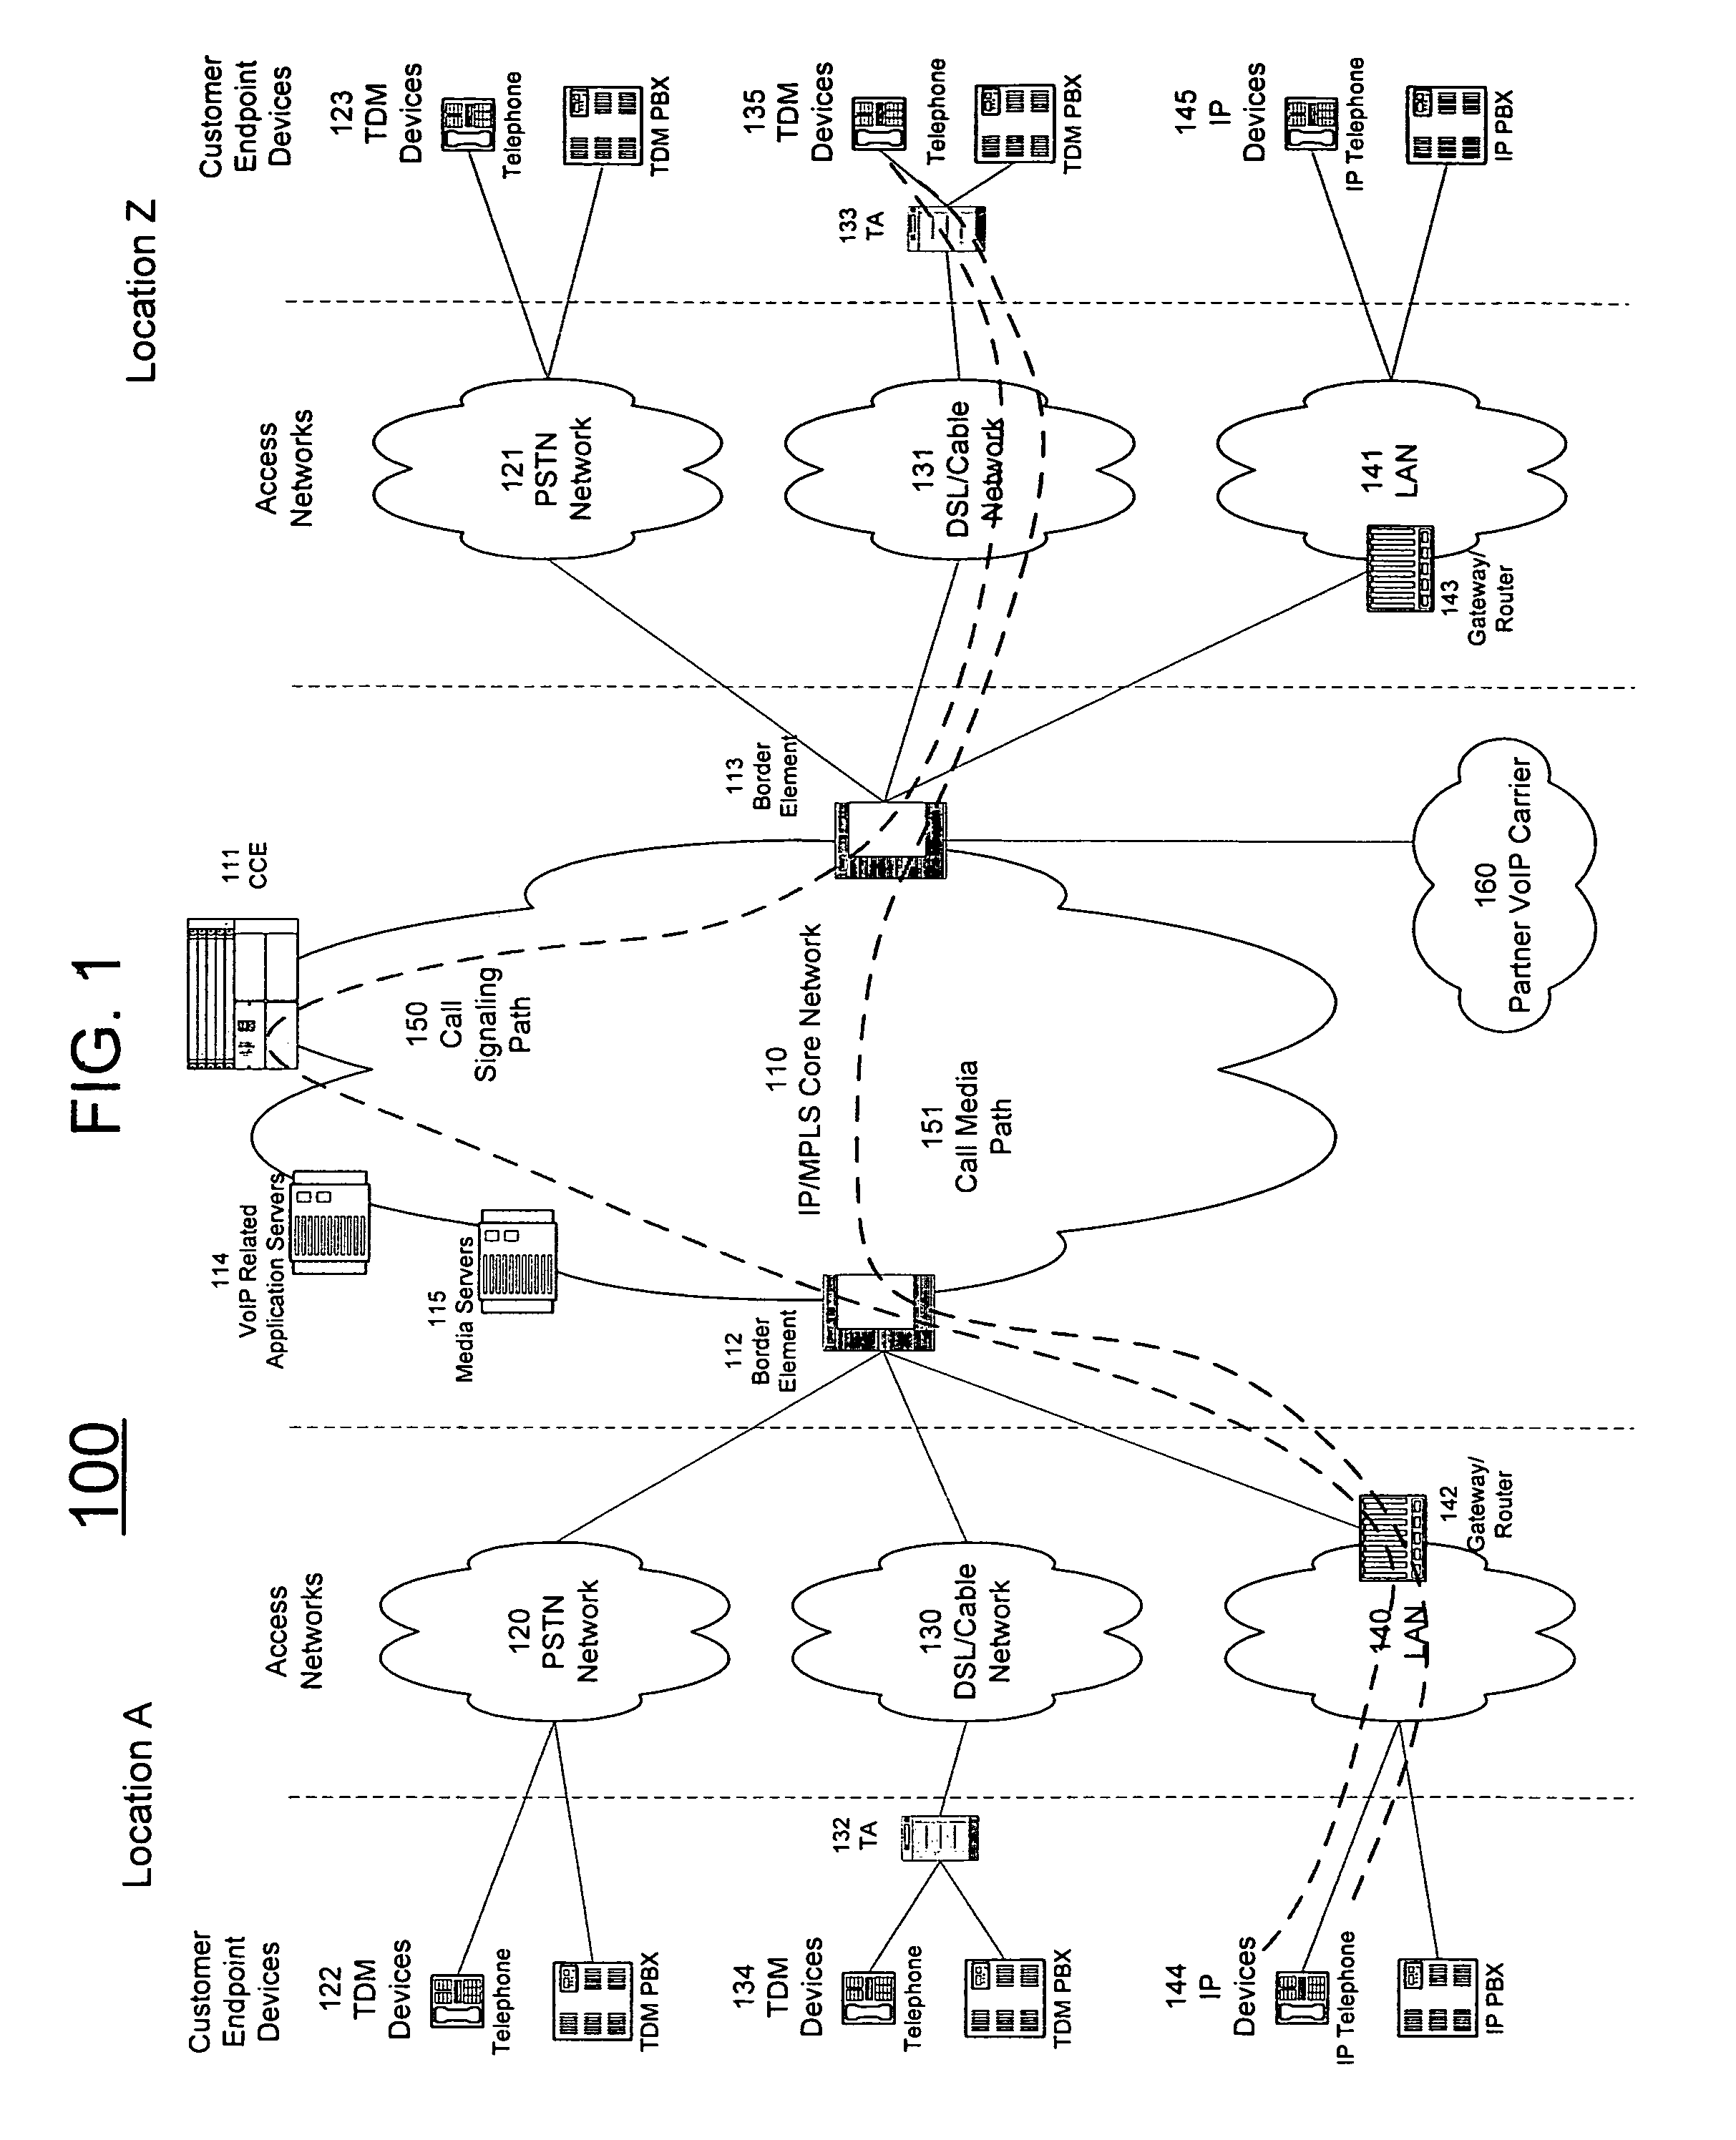 Method and apparatus for reconfiguring network routes